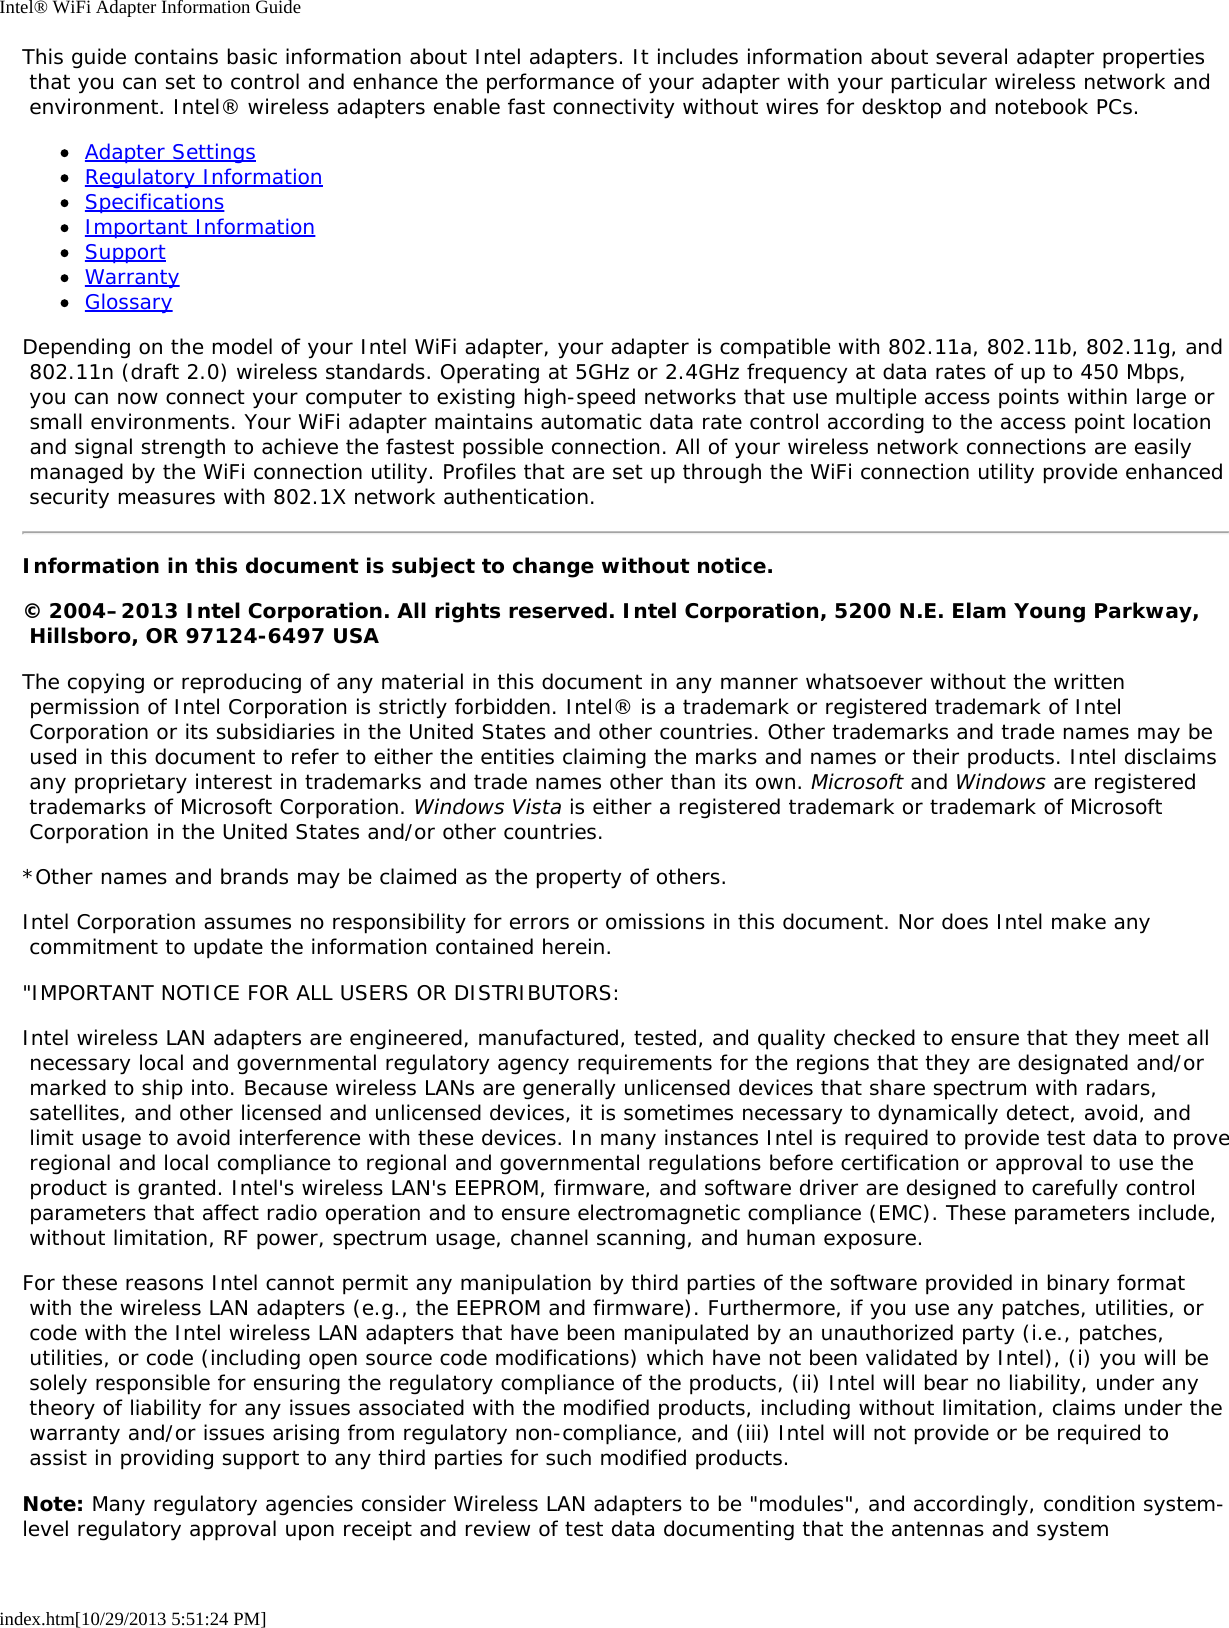 Intel® WiFi Adapter Information Guideindex.htm[10/29/2013 5:51:24 PM]This guide contains basic information about Intel adapters. It includes information about several adapter properties that you can set to control and enhance the performance of your adapter with your particular wireless network and environment. Intel® wireless adapters enable fast connectivity without wires for desktop and notebook PCs.Adapter SettingsRegulatory InformationSpecificationsImportant InformationSupportWarrantyGlossaryDepending on the model of your Intel WiFi adapter, your adapter is compatible with 802.11a, 802.11b, 802.11g, and 802.11n (draft 2.0) wireless standards. Operating at 5GHz or 2.4GHz frequency at data rates of up to 450 Mbps, you can now connect your computer to existing high-speed networks that use multiple access points within large or small environments. Your WiFi adapter maintains automatic data rate control according to the access point location and signal strength to achieve the fastest possible connection. All of your wireless network connections are easily managed by the WiFi connection utility. Profiles that are set up through the WiFi connection utility provide enhanced security measures with 802.1X network authentication.Information in this document is subject to change without notice.© 2004–2013 Intel Corporation. All rights reserved. Intel Corporation, 5200 N.E. Elam Young Parkway, Hillsboro, OR 97124-6497 USAThe copying or reproducing of any material in this document in any manner whatsoever without the written permission of Intel Corporation is strictly forbidden. Intel® is a trademark or registered trademark of Intel Corporation or its subsidiaries in the United States and other countries. Other trademarks and trade names may be used in this document to refer to either the entities claiming the marks and names or their products. Intel disclaims any proprietary interest in trademarks and trade names other than its own. Microsoft and Windows are registered trademarks of Microsoft Corporation. Windows Vista is either a registered trademark or trademark of Microsoft Corporation in the United States and/or other countries.*Other names and brands may be claimed as the property of others.Intel Corporation assumes no responsibility for errors or omissions in this document. Nor does Intel make any commitment to update the information contained herein.&quot;IMPORTANT NOTICE FOR ALL USERS OR DISTRIBUTORS:Intel wireless LAN adapters are engineered, manufactured, tested, and quality checked to ensure that they meet all necessary local and governmental regulatory agency requirements for the regions that they are designated and/or marked to ship into. Because wireless LANs are generally unlicensed devices that share spectrum with radars, satellites, and other licensed and unlicensed devices, it is sometimes necessary to dynamically detect, avoid, and limit usage to avoid interference with these devices. In many instances Intel is required to provide test data to prove regional and local compliance to regional and governmental regulations before certification or approval to use the product is granted. Intel&apos;s wireless LAN&apos;s EEPROM, firmware, and software driver are designed to carefully control parameters that affect radio operation and to ensure electromagnetic compliance (EMC). These parameters include, without limitation, RF power, spectrum usage, channel scanning, and human exposure.For these reasons Intel cannot permit any manipulation by third parties of the software provided in binary format with the wireless LAN adapters (e.g., the EEPROM and firmware). Furthermore, if you use any patches, utilities, or code with the Intel wireless LAN adapters that have been manipulated by an unauthorized party (i.e., patches, utilities, or code (including open source code modifications) which have not been validated by Intel), (i) you will be solely responsible for ensuring the regulatory compliance of the products, (ii) Intel will bear no liability, under any theory of liability for any issues associated with the modified products, including without limitation, claims under the warranty and/or issues arising from regulatory non-compliance, and (iii) Intel will not provide or be required to assist in providing support to any third parties for such modified products.Note: Many regulatory agencies consider Wireless LAN adapters to be &quot;modules&quot;, and accordingly, condition system-level regulatory approval upon receipt and review of test data documenting that the antennas and system